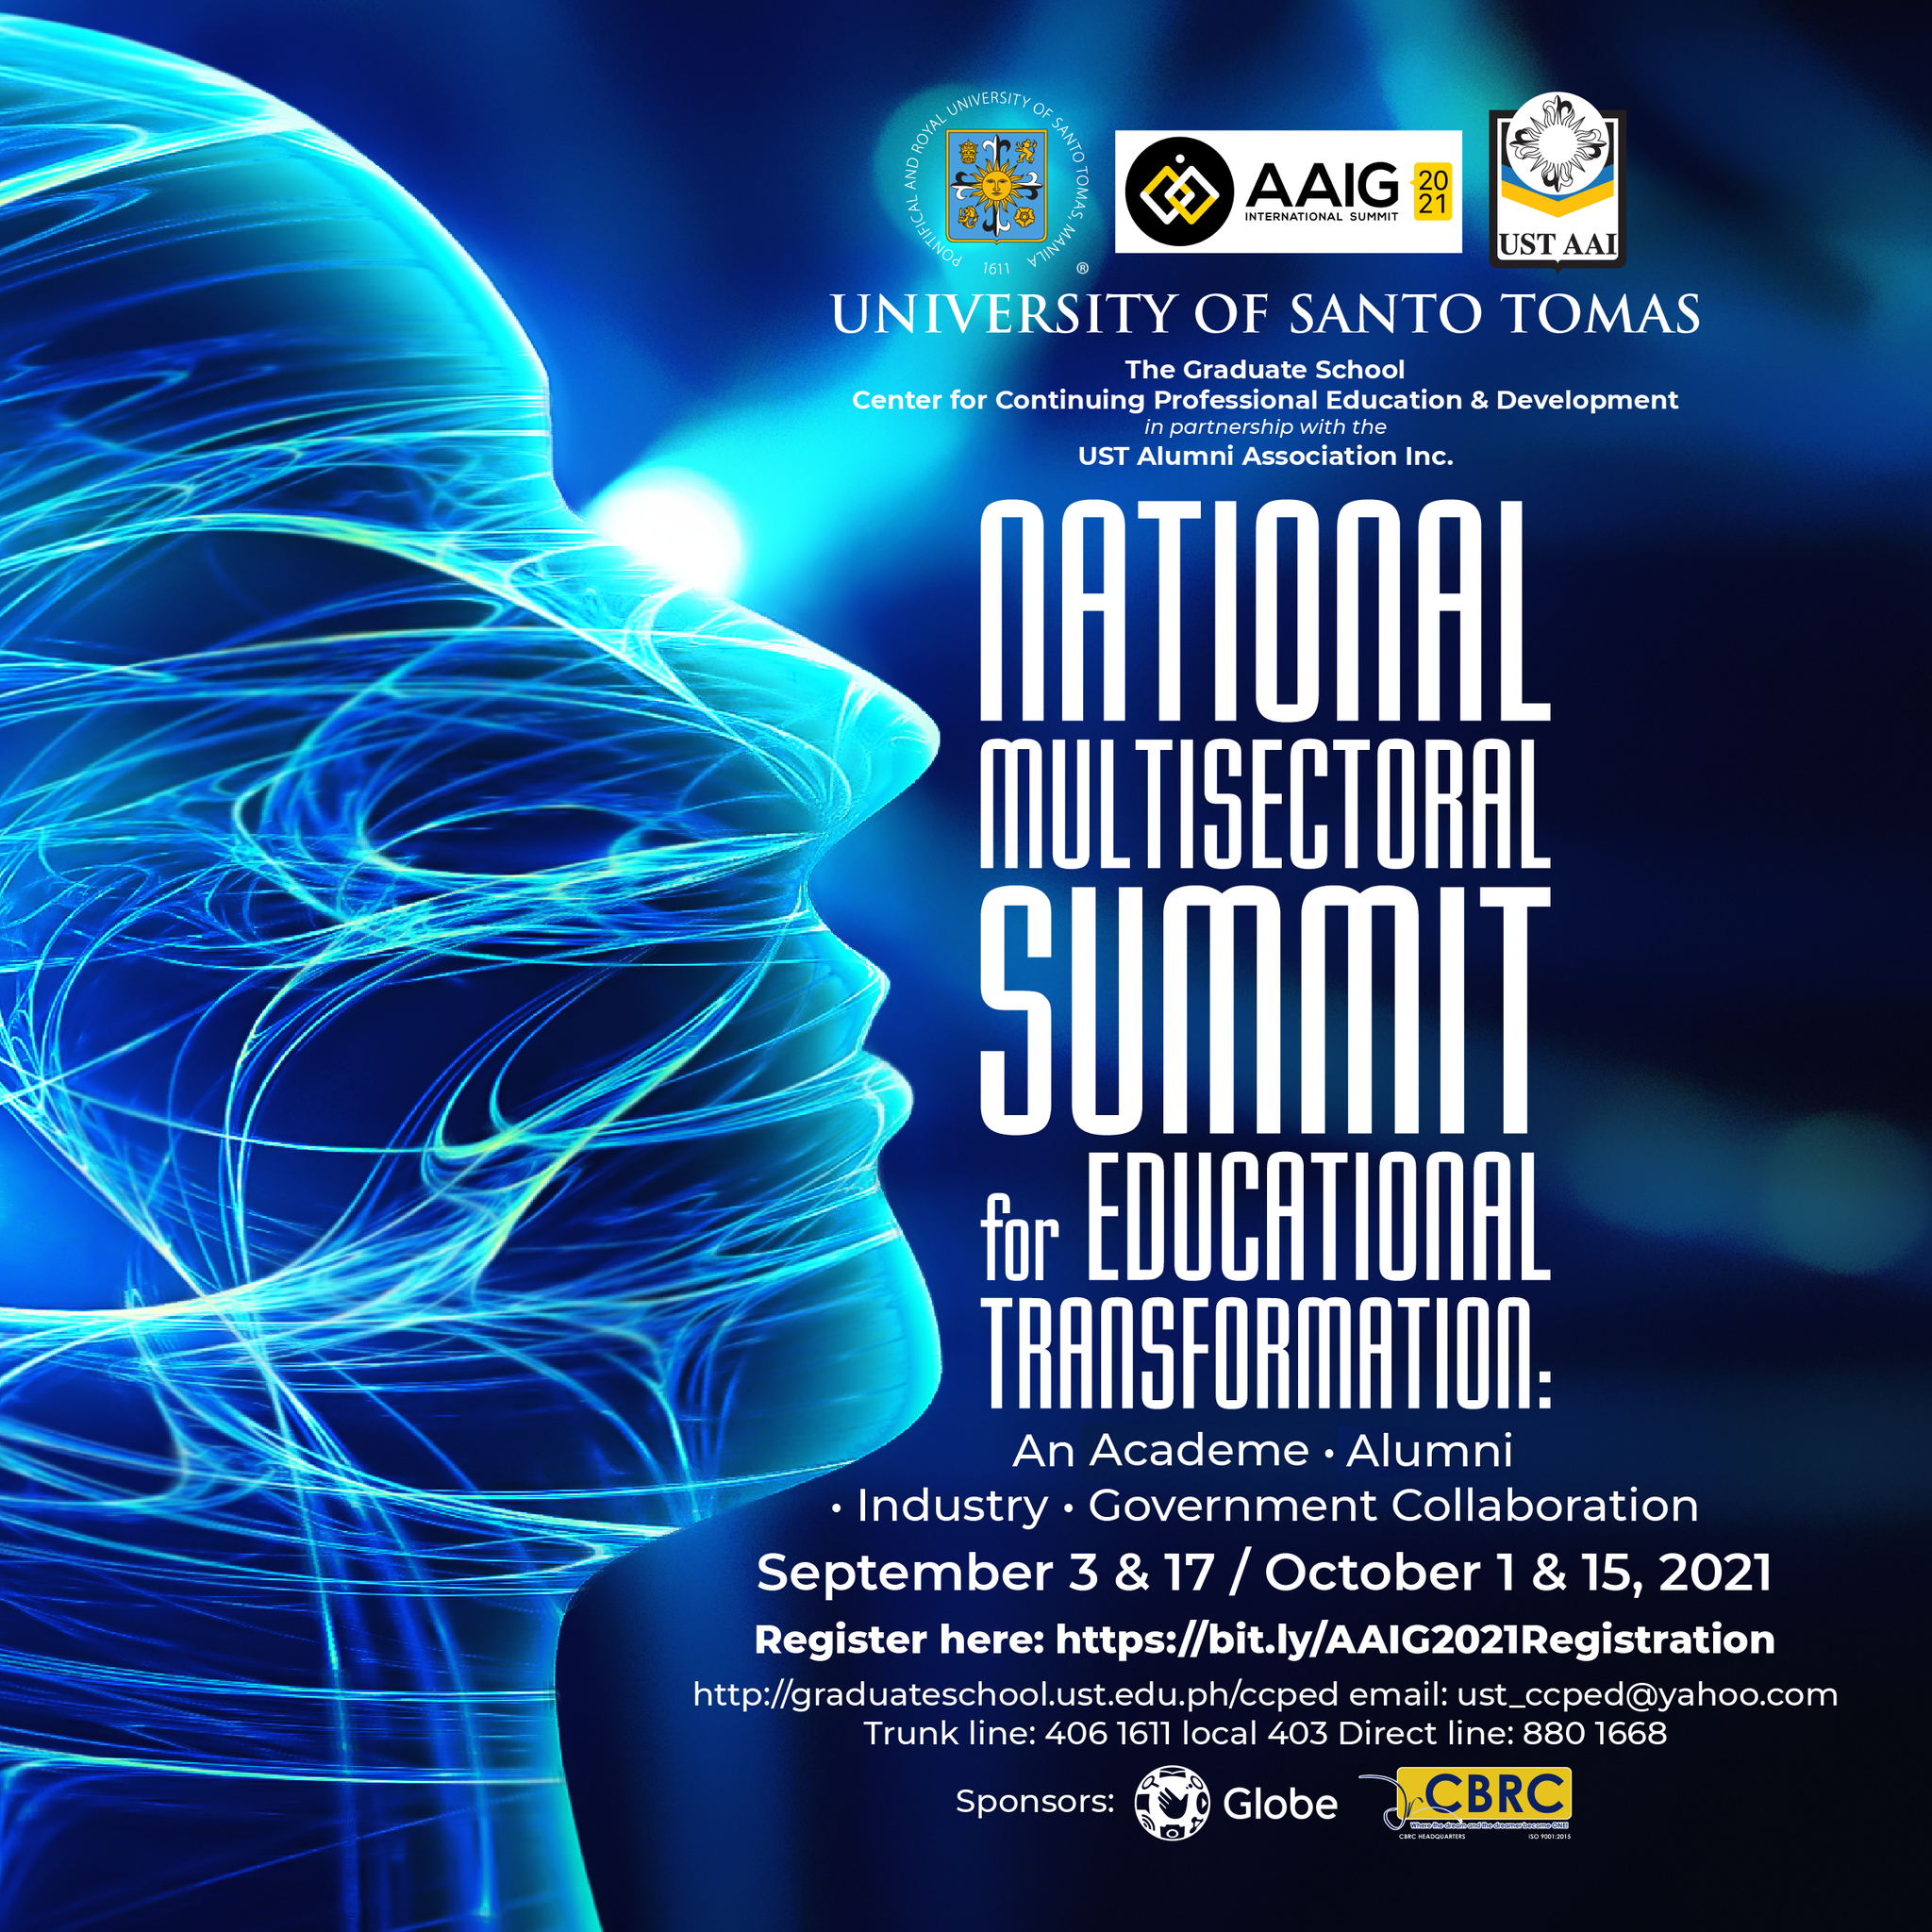 National Multisectoral Summit for Educational Transformation: An Academe – Alumni - Industry – Government Collaboration